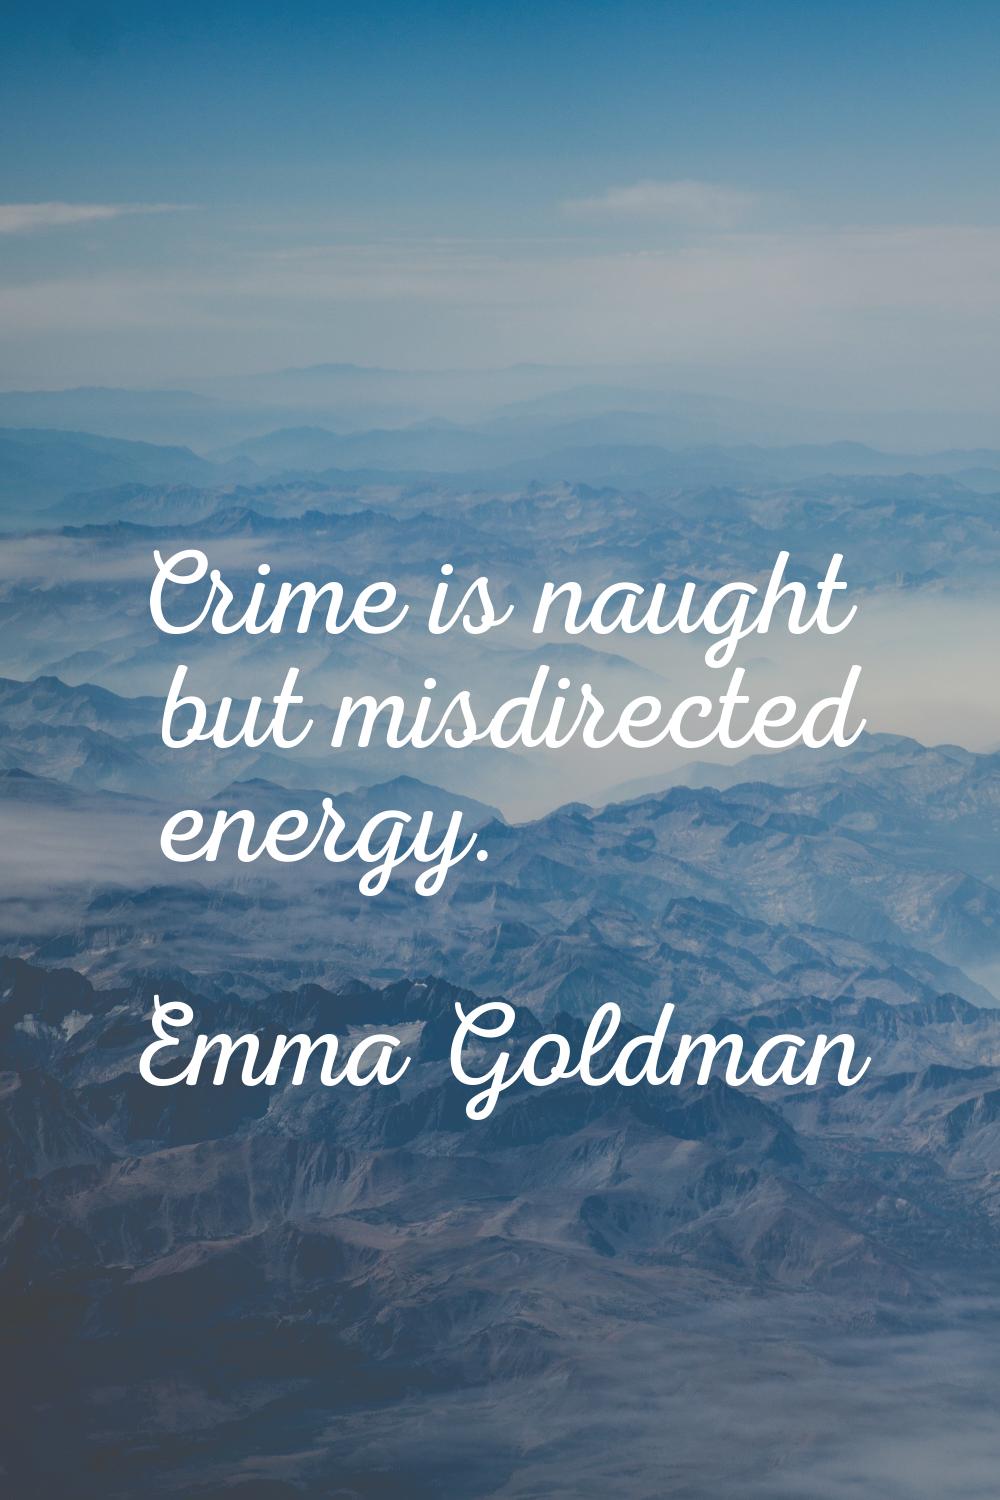 Crime is naught but misdirected energy.